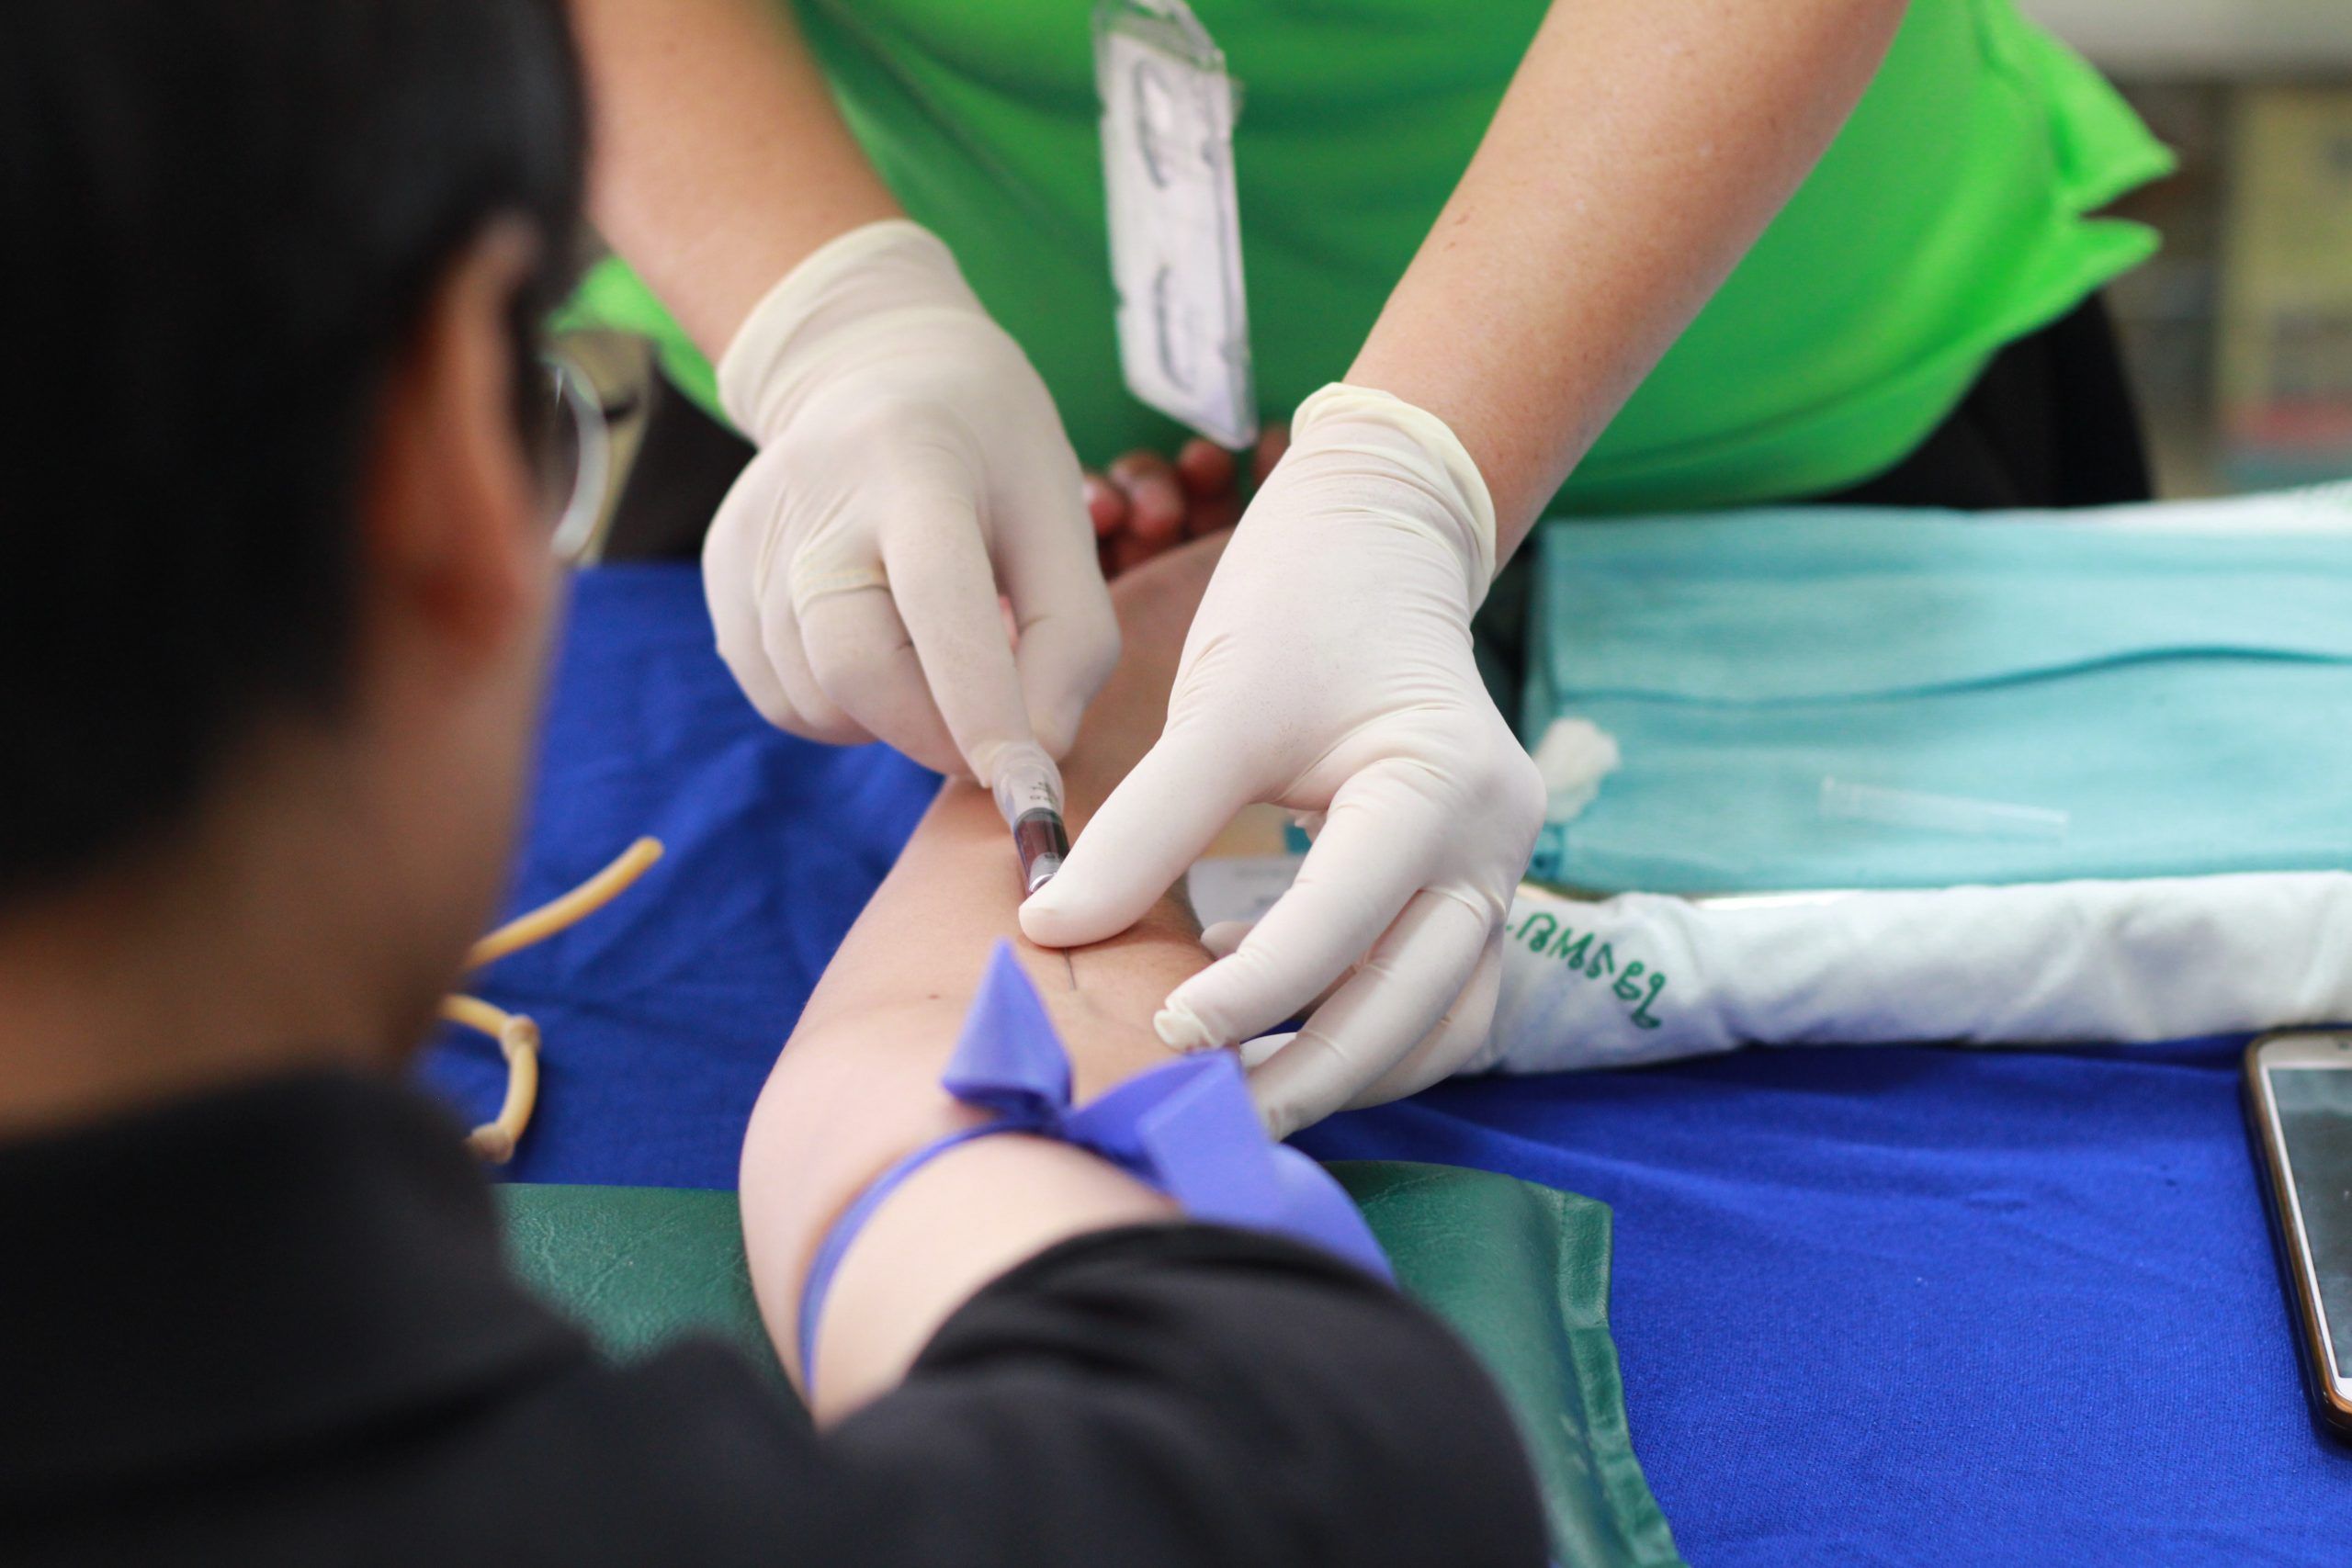 Medical Technician inserting a syringe into a patients arm